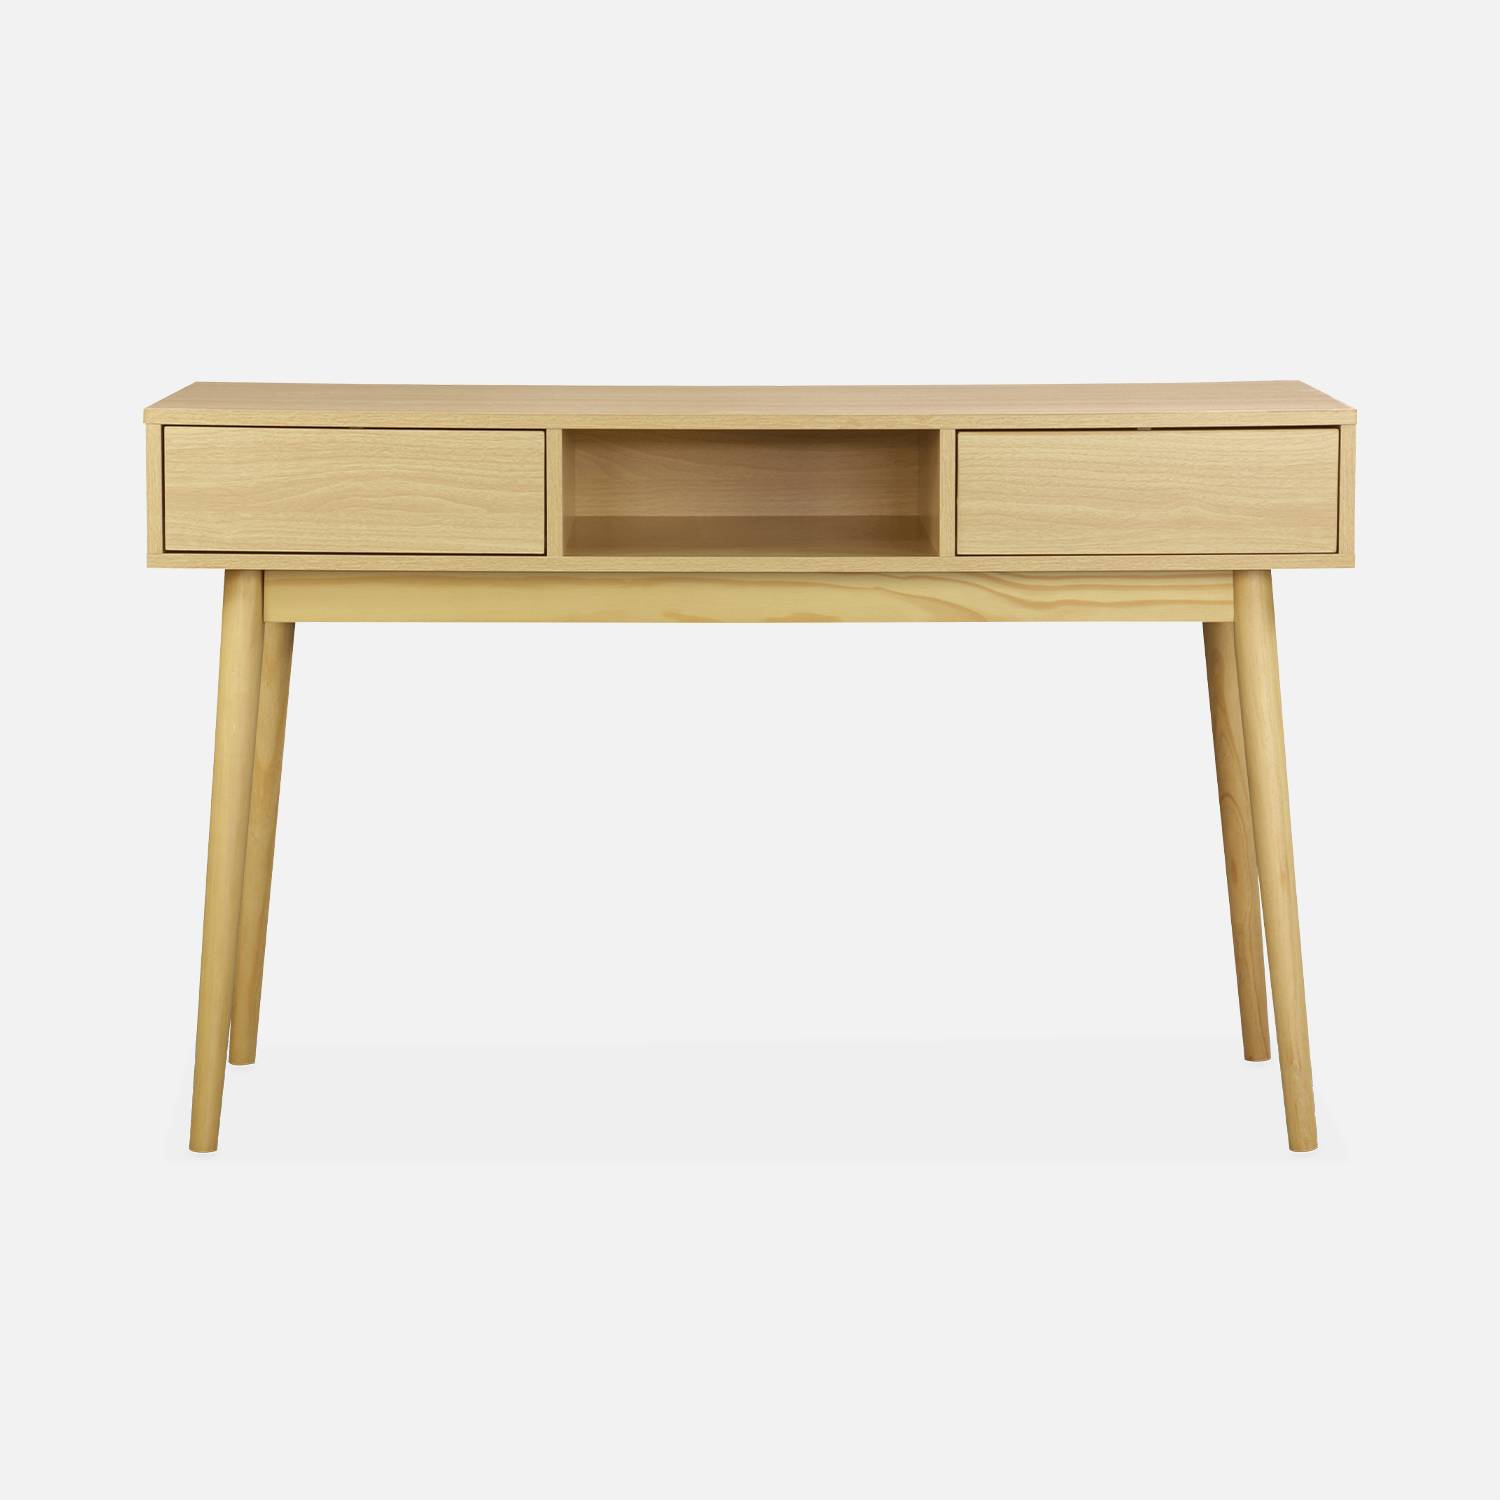 Wood-effect console table with two drawers and one storage nook, 120x48x75cm - Mika - Natural Wood colour,sweeek,Photo4